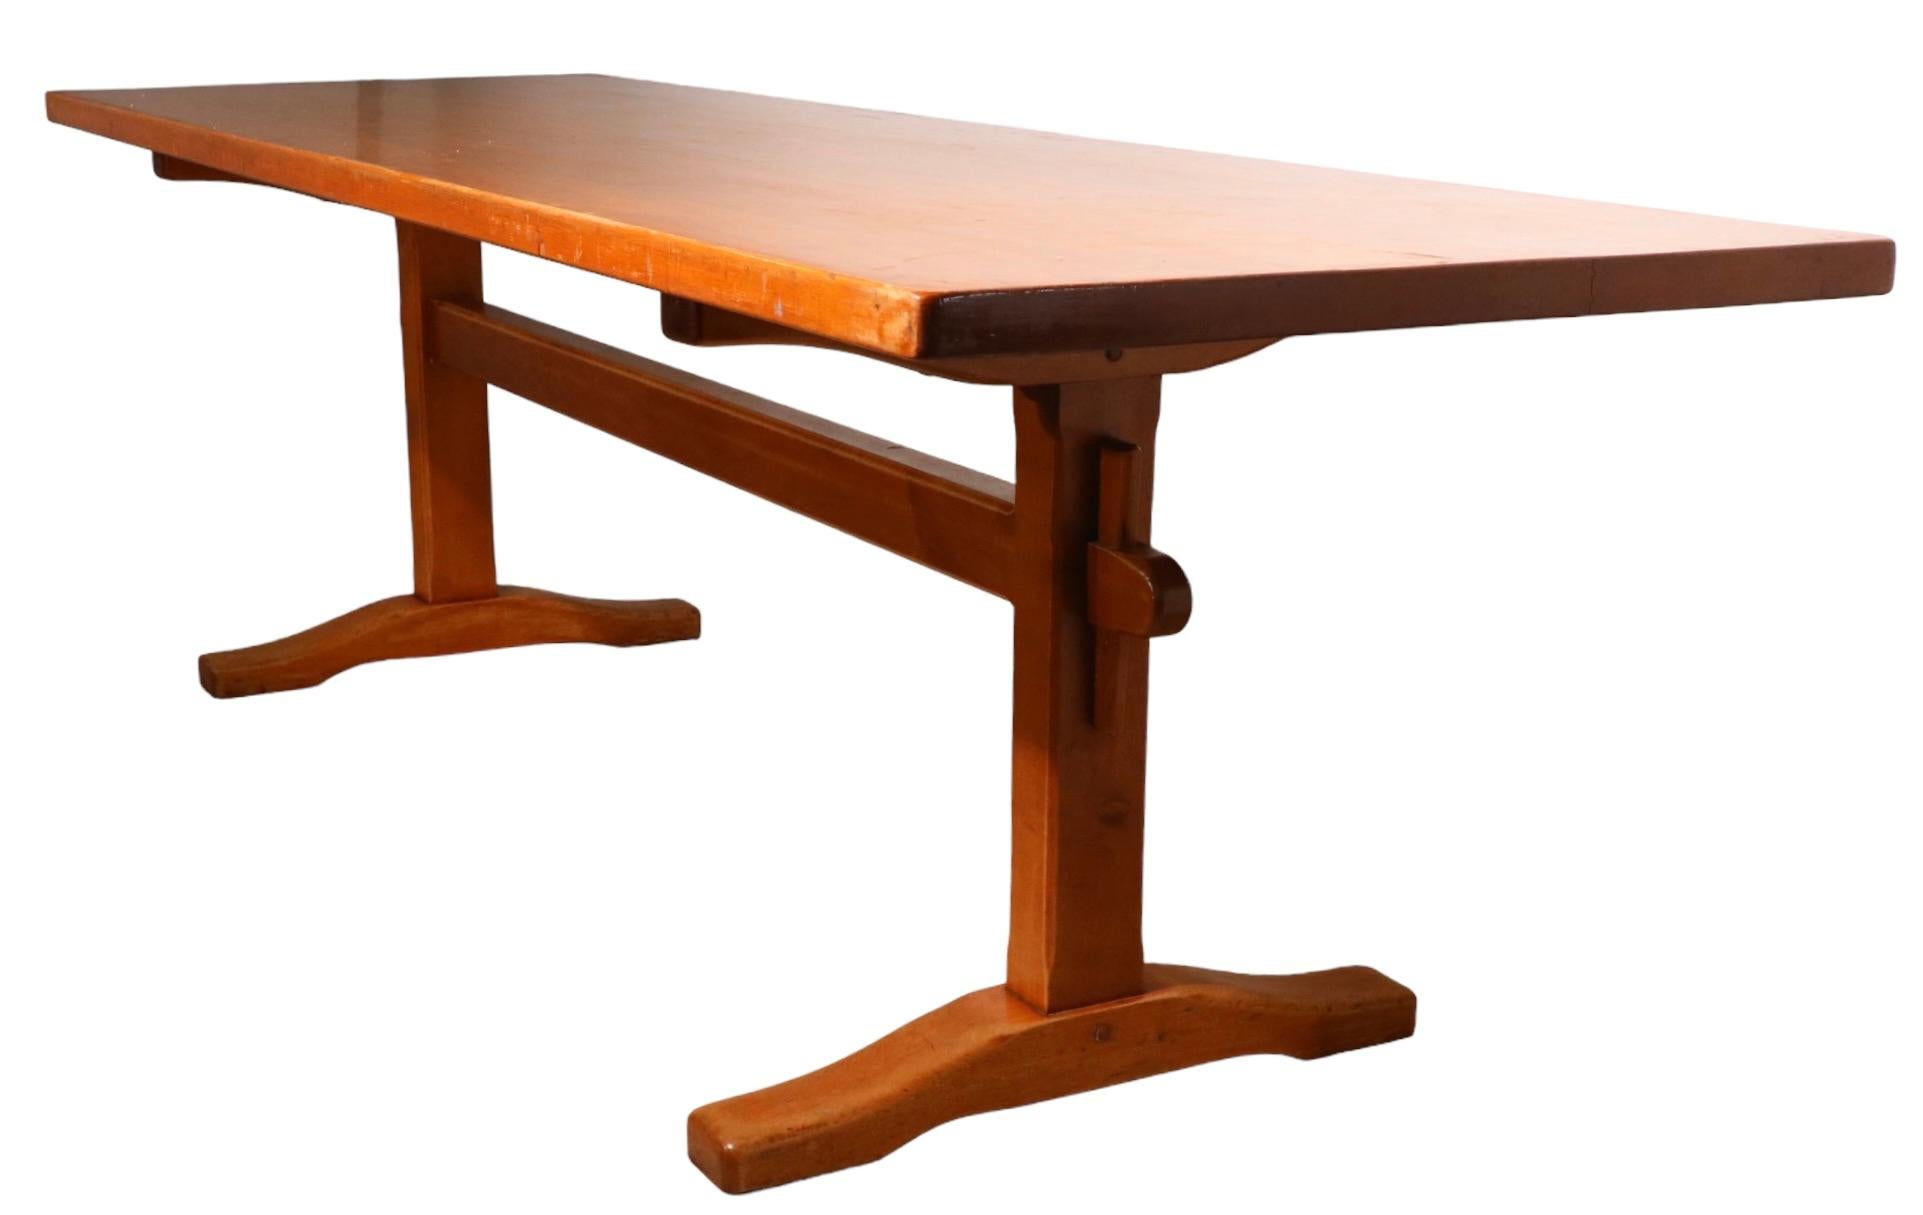 Exceptional group of farm tables made by Stickley, constructed of solid maple marked Stickley Fayetteville Syracuse. The tables feature a trestle form base which supports a thick rectangular top. This table is model 6010 from the Stickley catalogue,